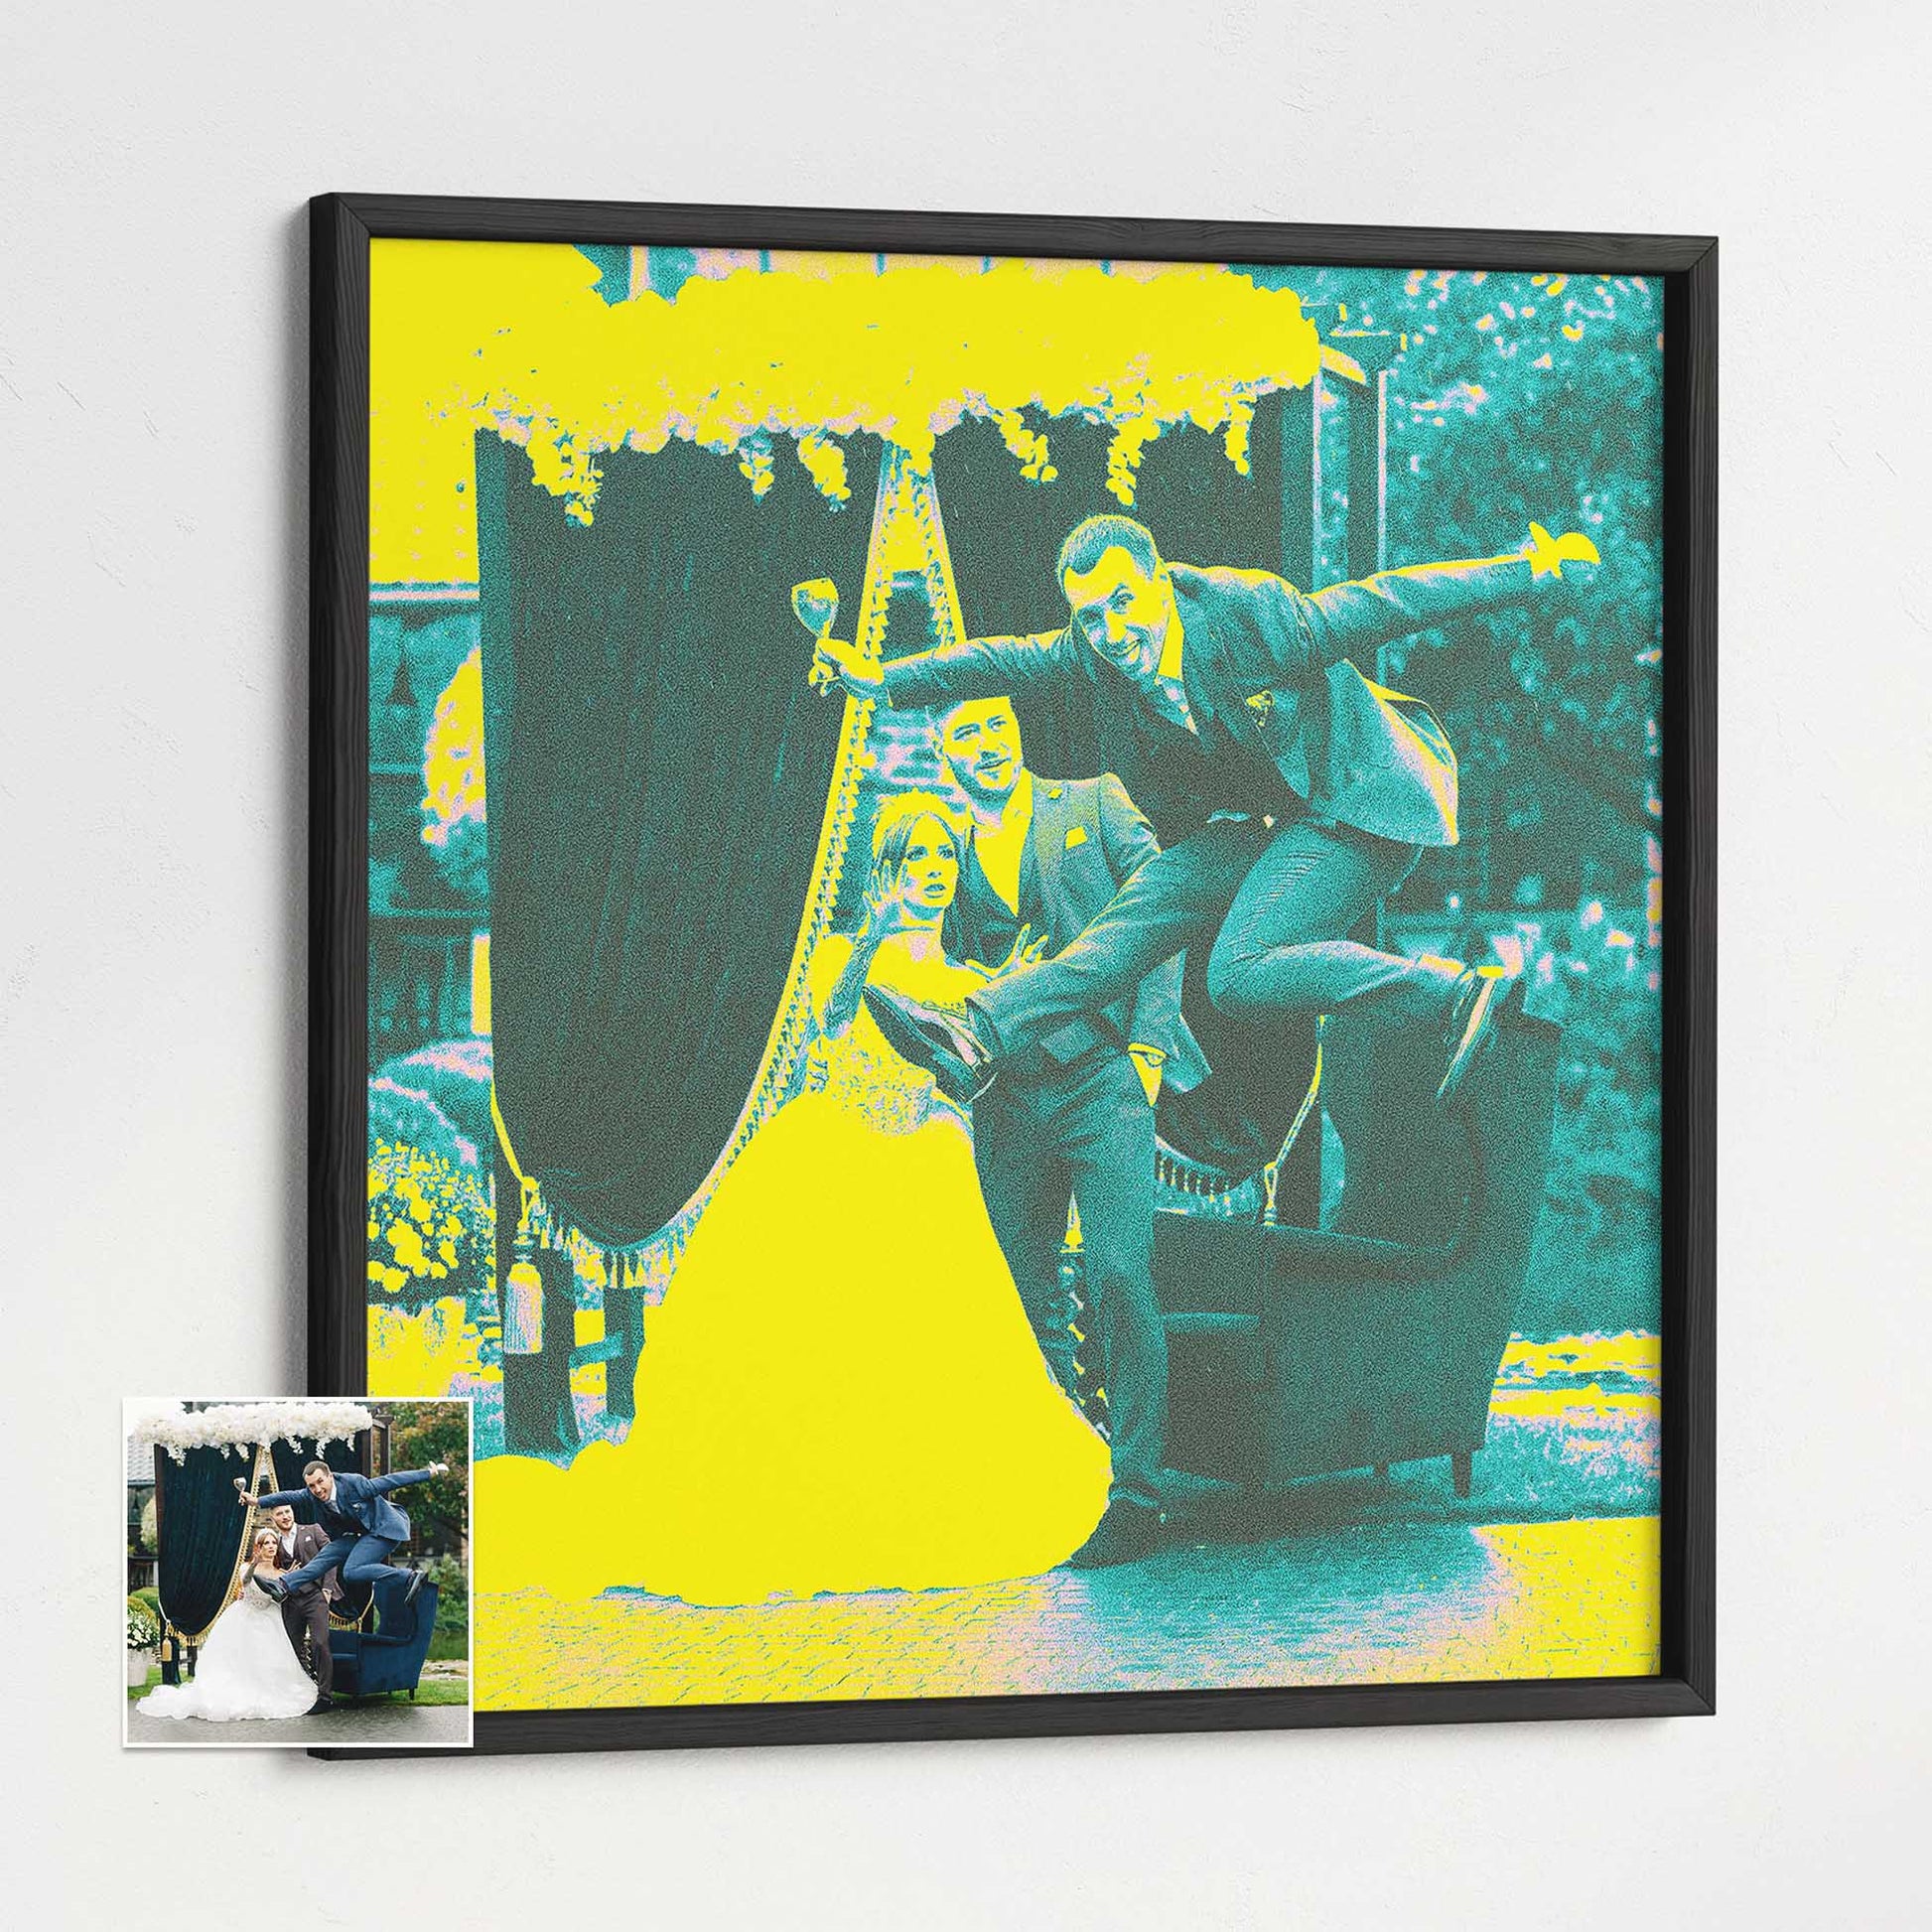 Elevate your interior design with the vibrant and bright Personalised Acid Yellow Framed Print. Its vivid and colorful design adds a unique and creative flair to your home decor. Crafted with a wooden frame and printed on museum paper